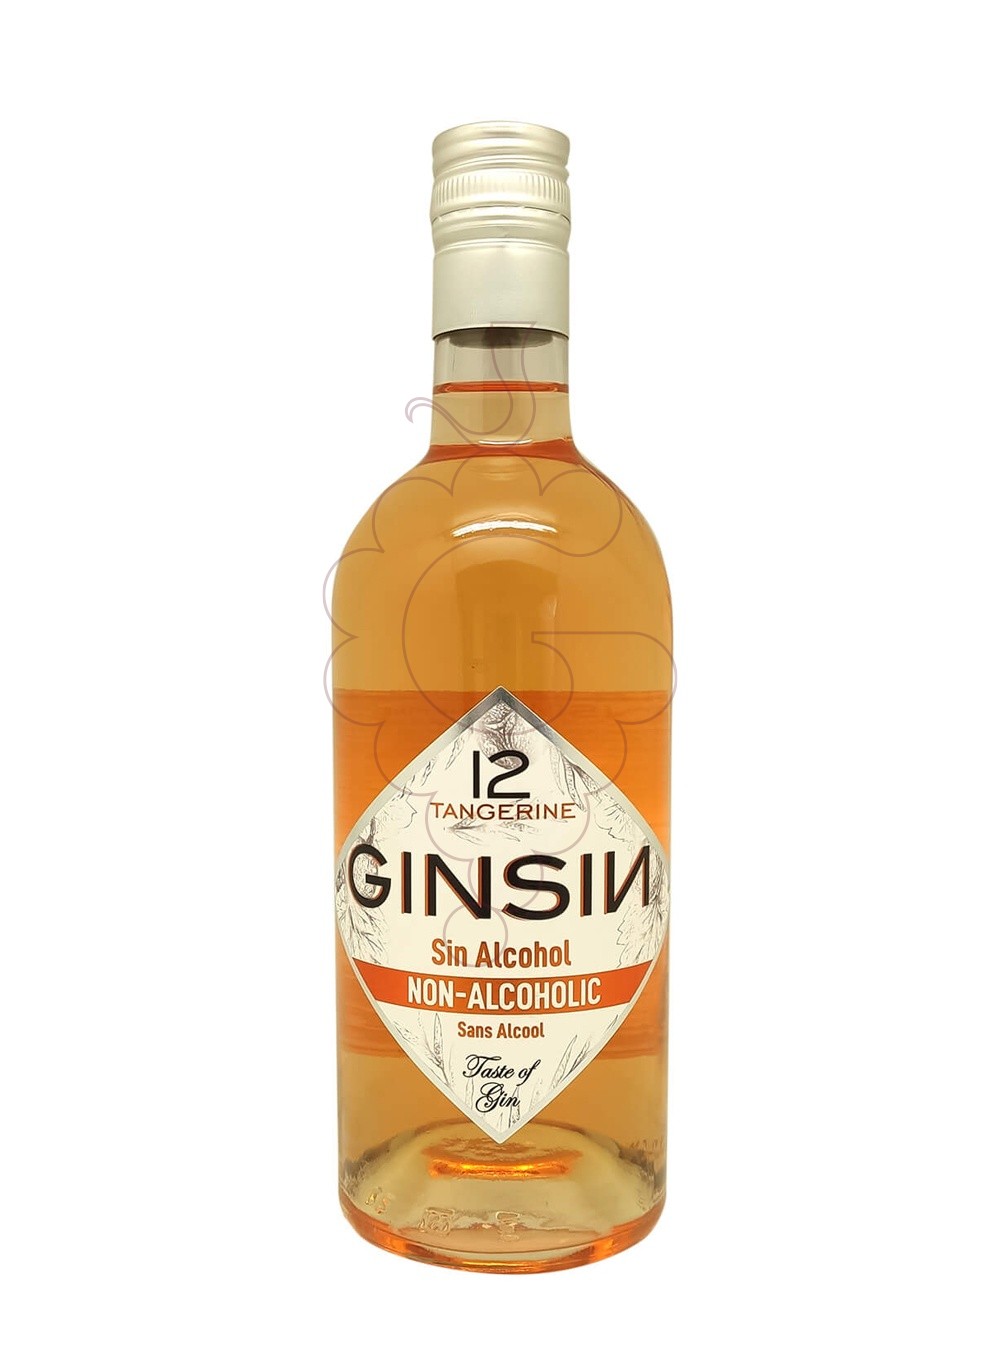 Photo Other Ginsin Tangerine (s/alcohol)